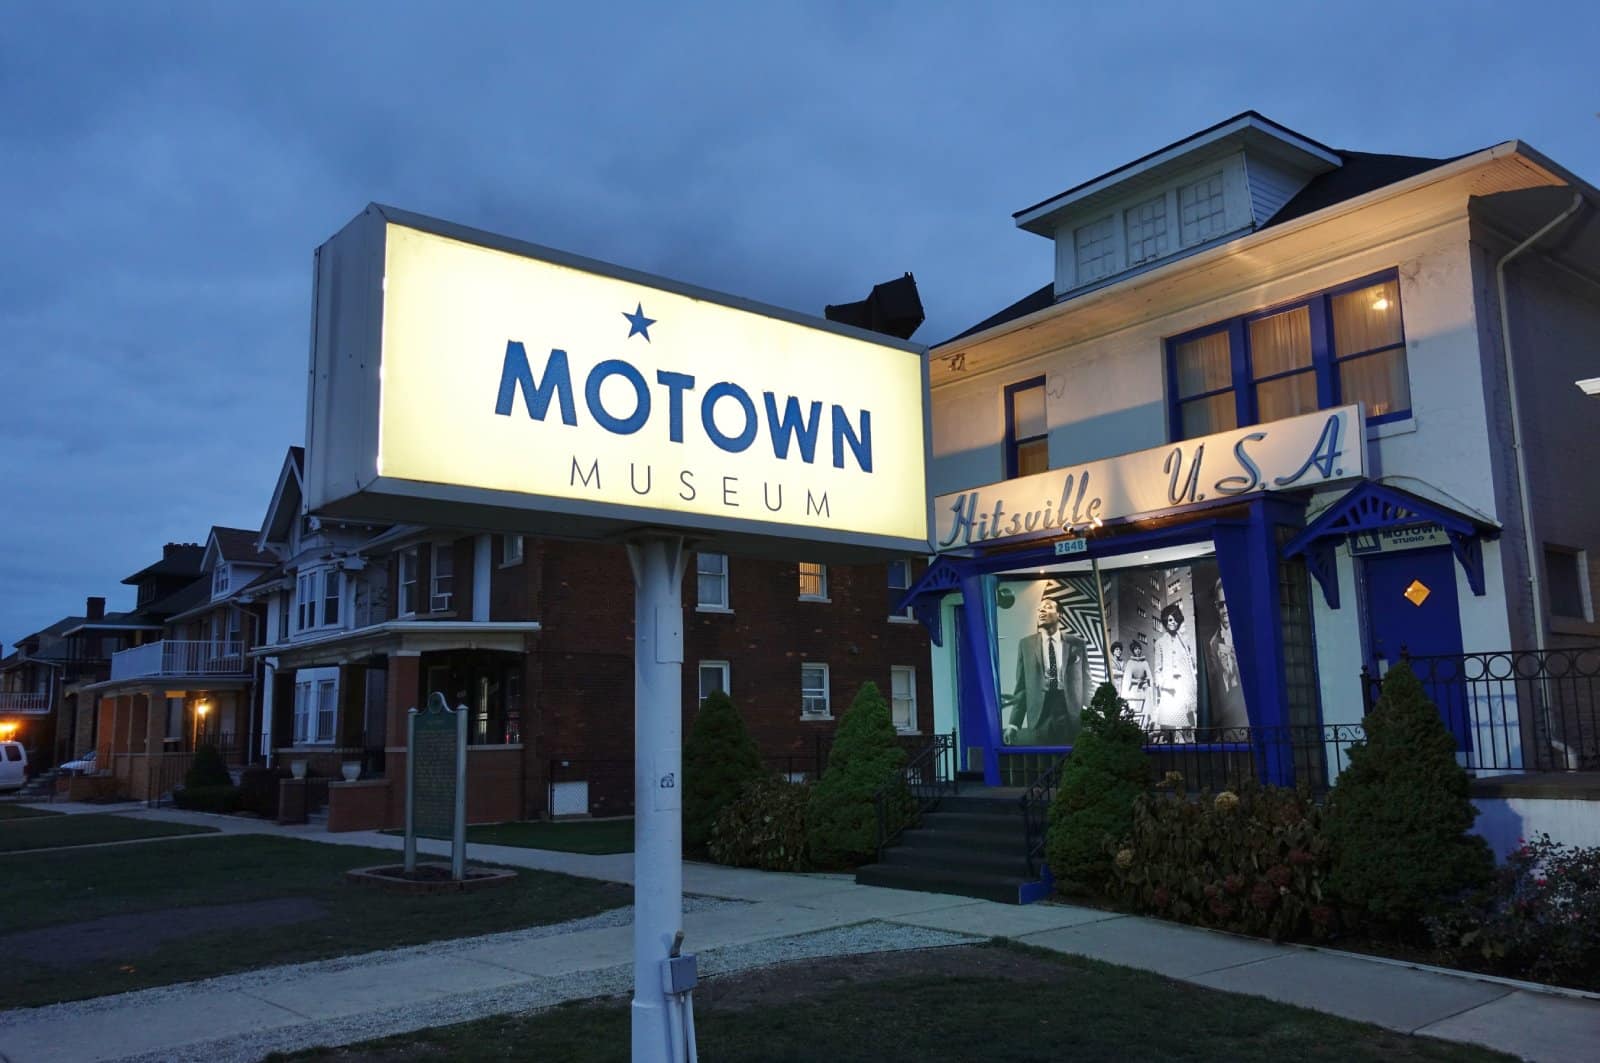 <p class="wp-caption-text">Image Credit: Shutterstock / EQRoy</p>  <p><span>The Motown Museum, located in the original Hitsville U.S.A. building, celebrates the legacy of Motown Records and its founder, Berry Gordy. The museum houses an extensive collection of artifacts, photographs, and costumes from Motown’s heyday, offering visitors a chance to step back in time to the era of The Supremes, Stevie Wonder, and Marvin Gaye.</span></p>